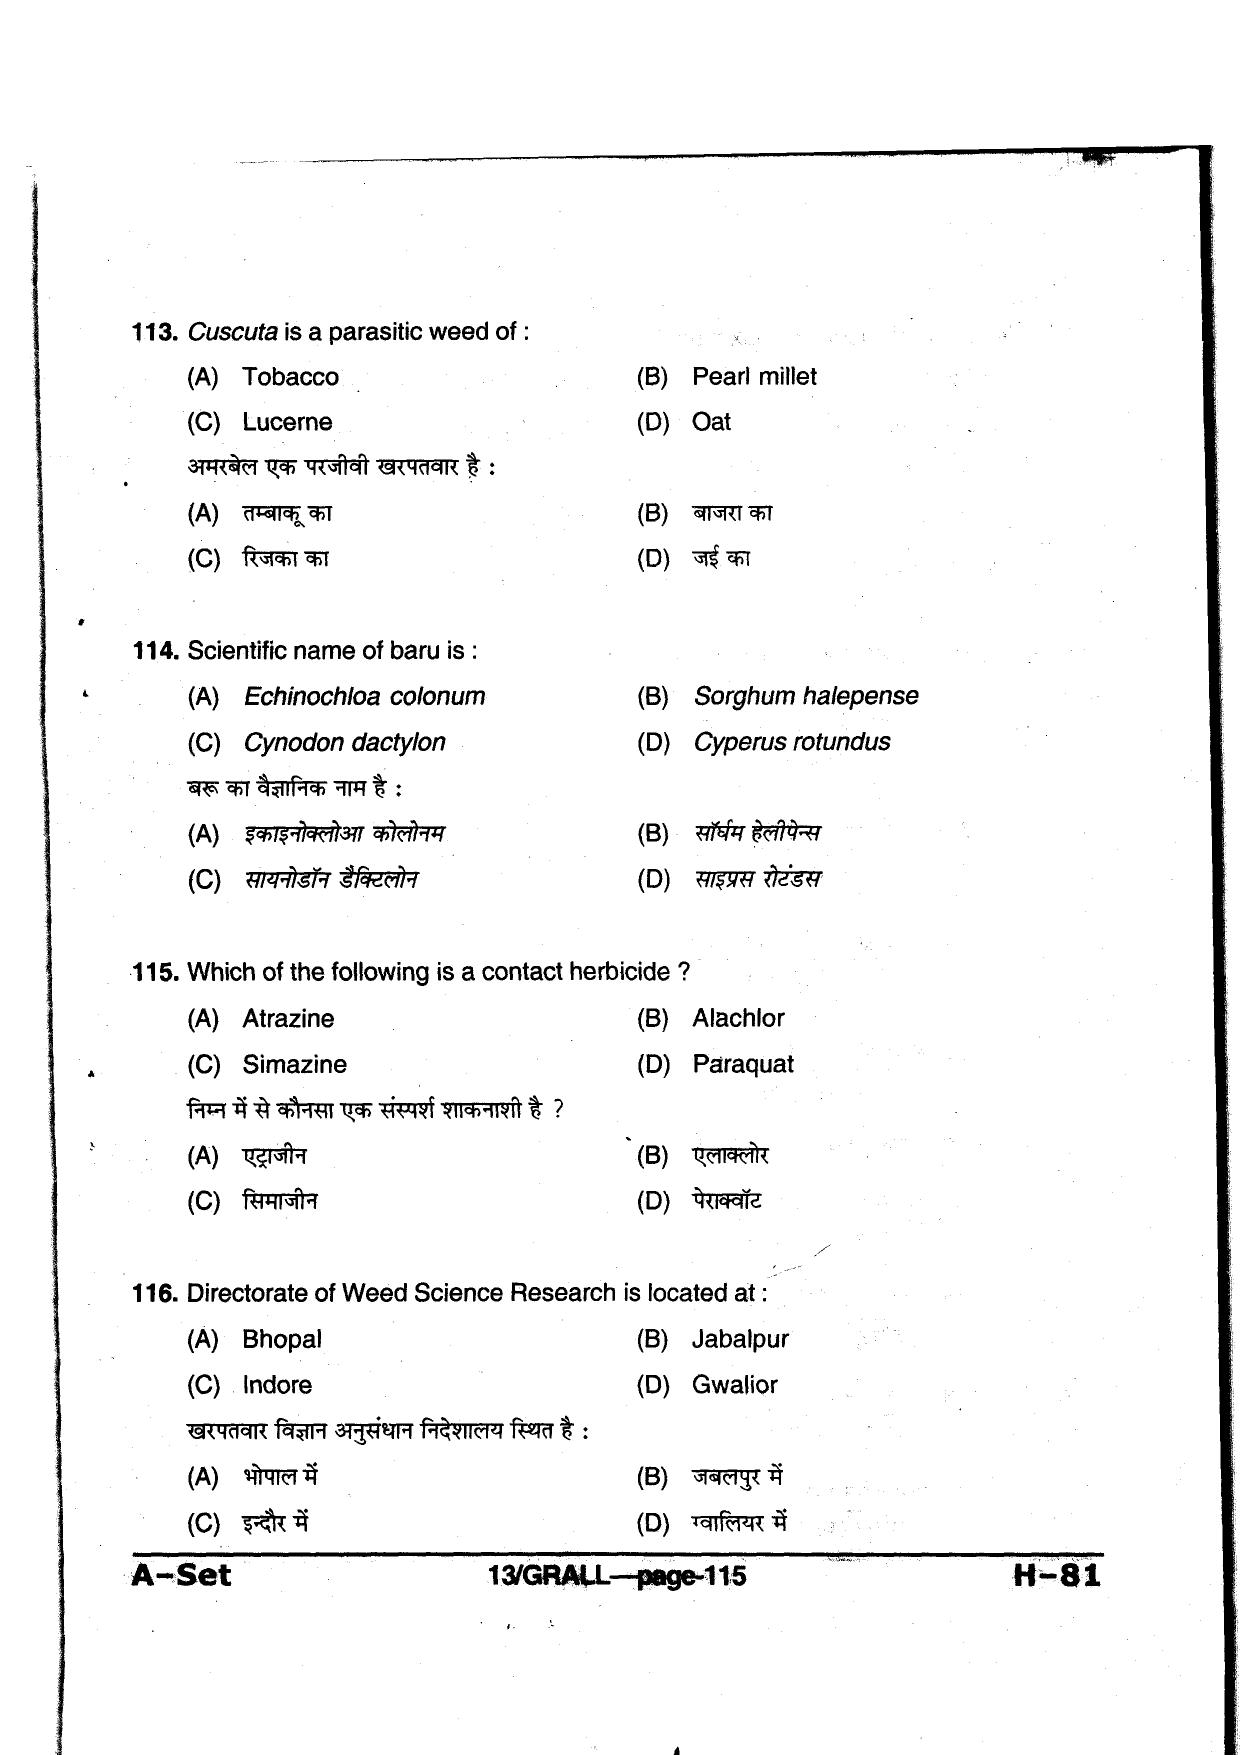 MP PAT 2013 Question Paper - Paper I - Page 115